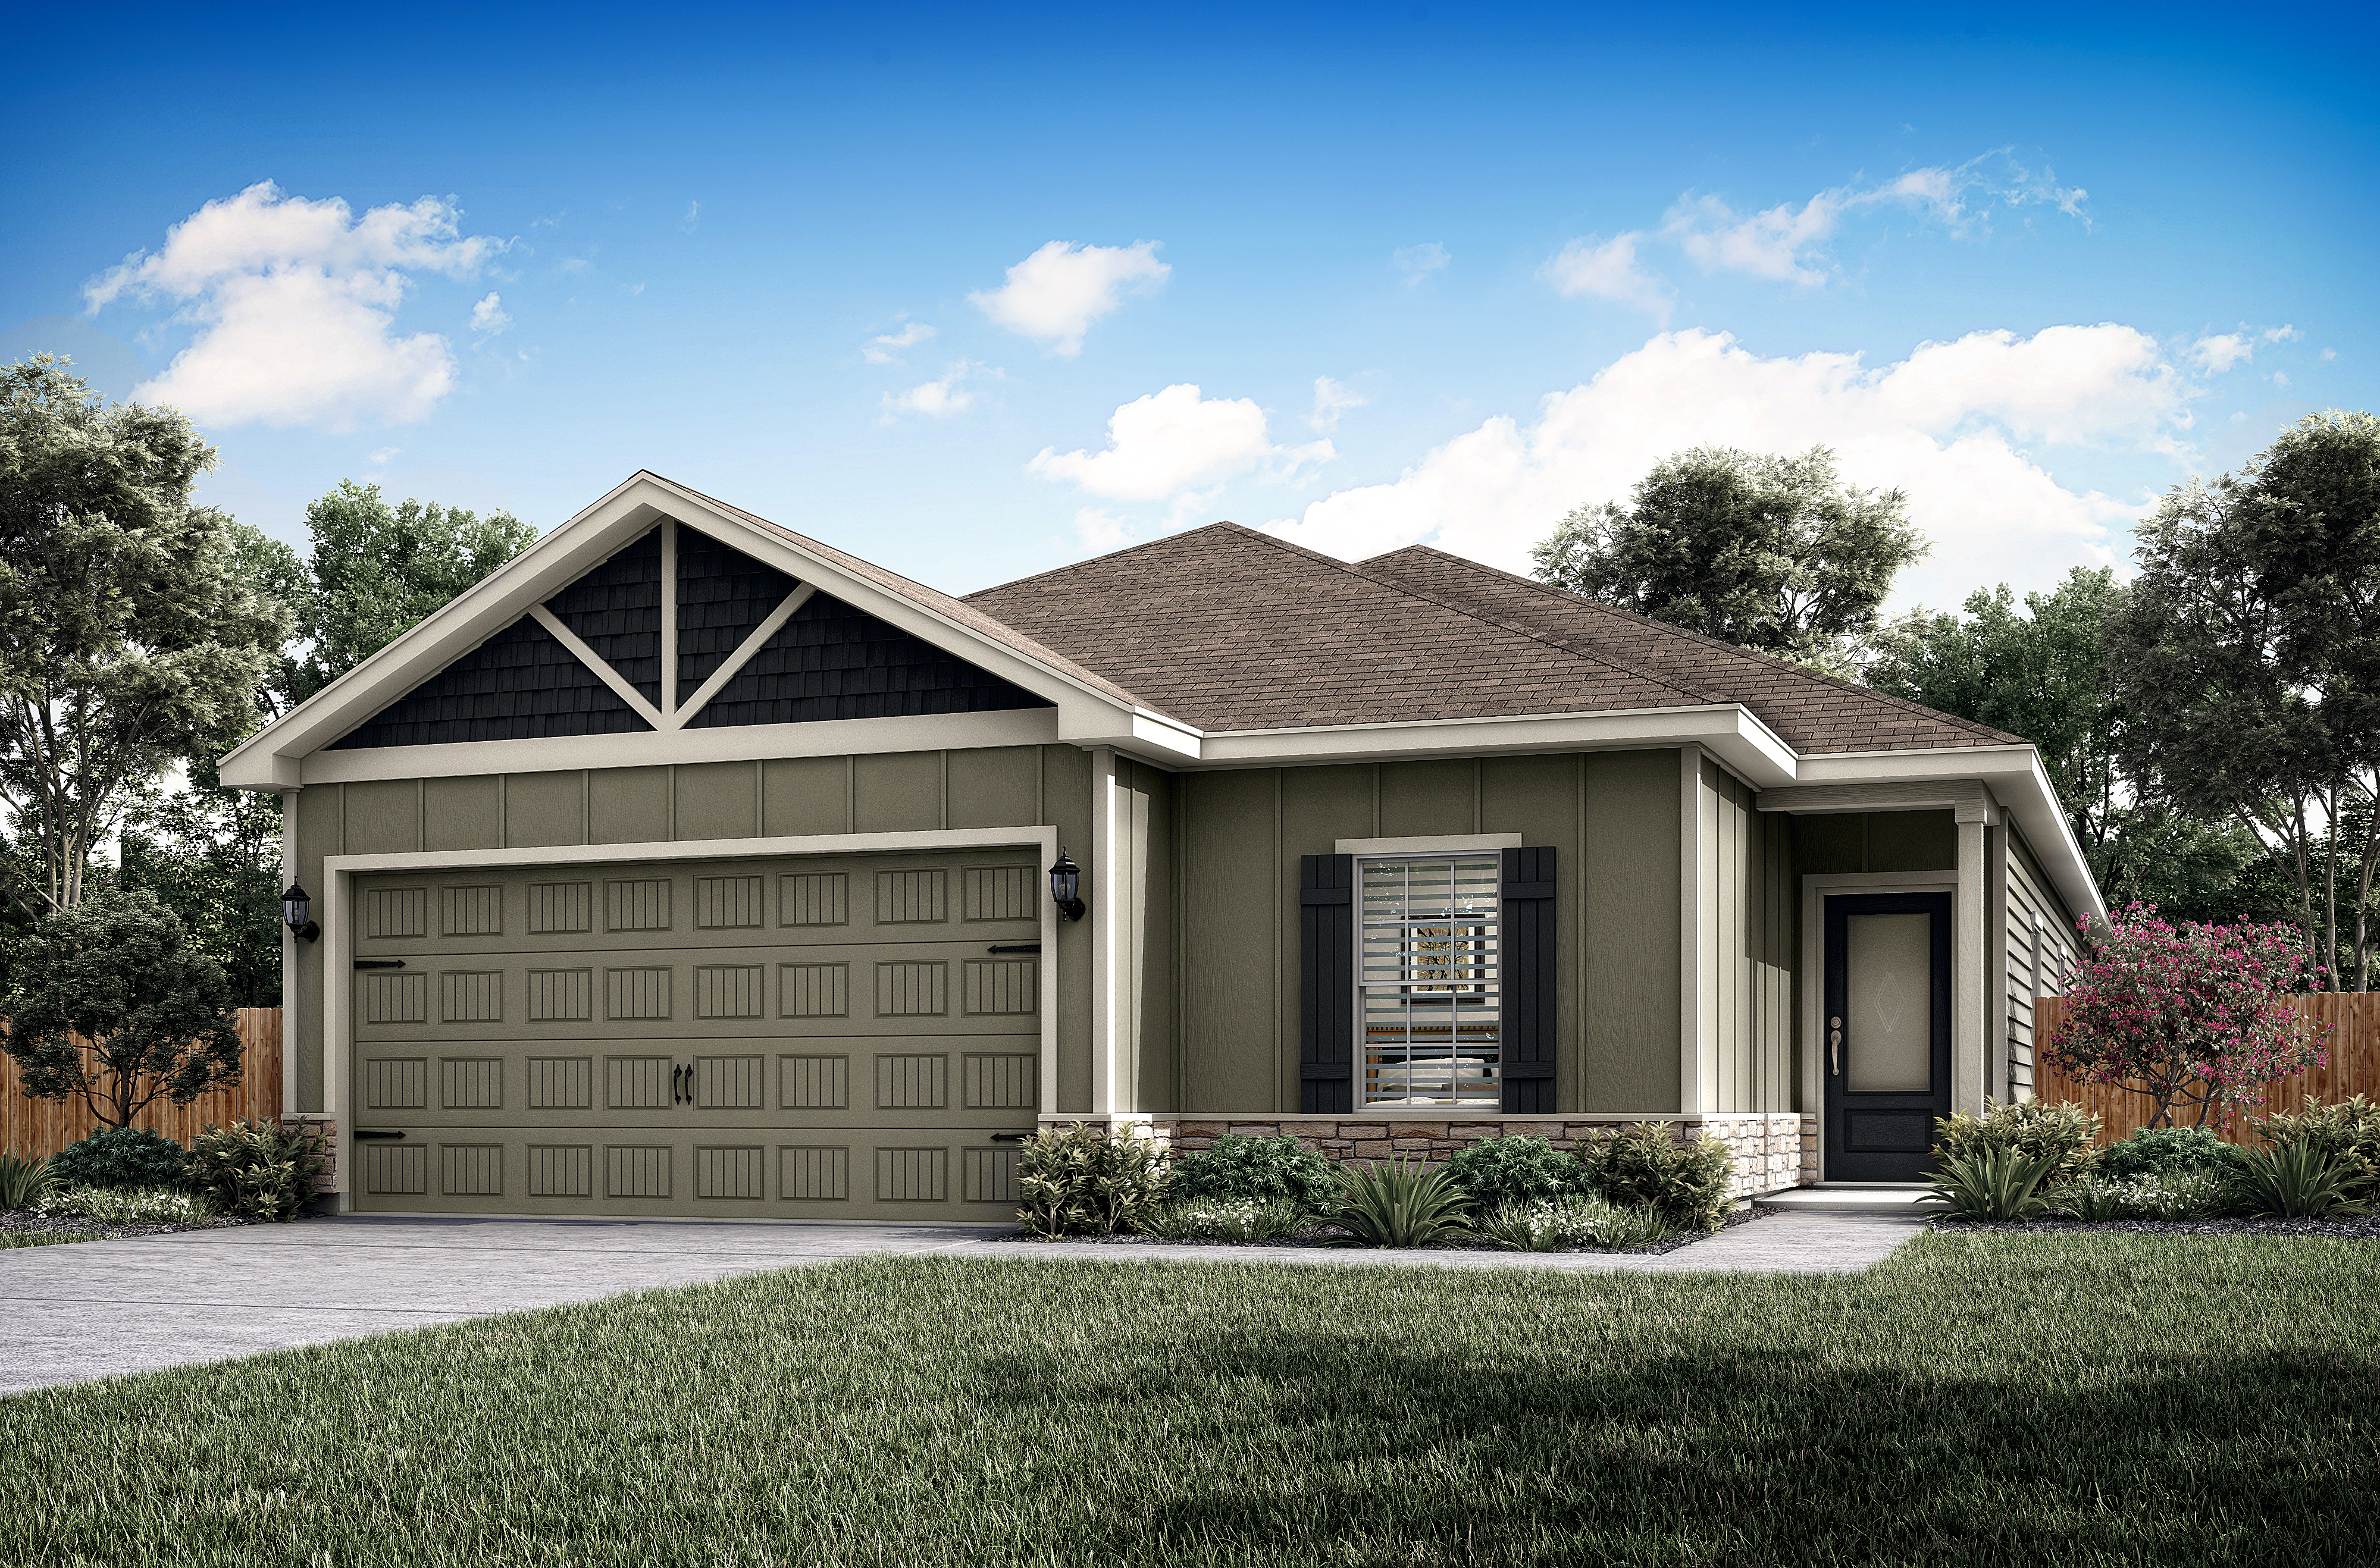 The Jasper Plan by LGI Homes at Sweetwater Ridge in Conroe features four bedrooms, two bathrooms and a large outdoor patio.